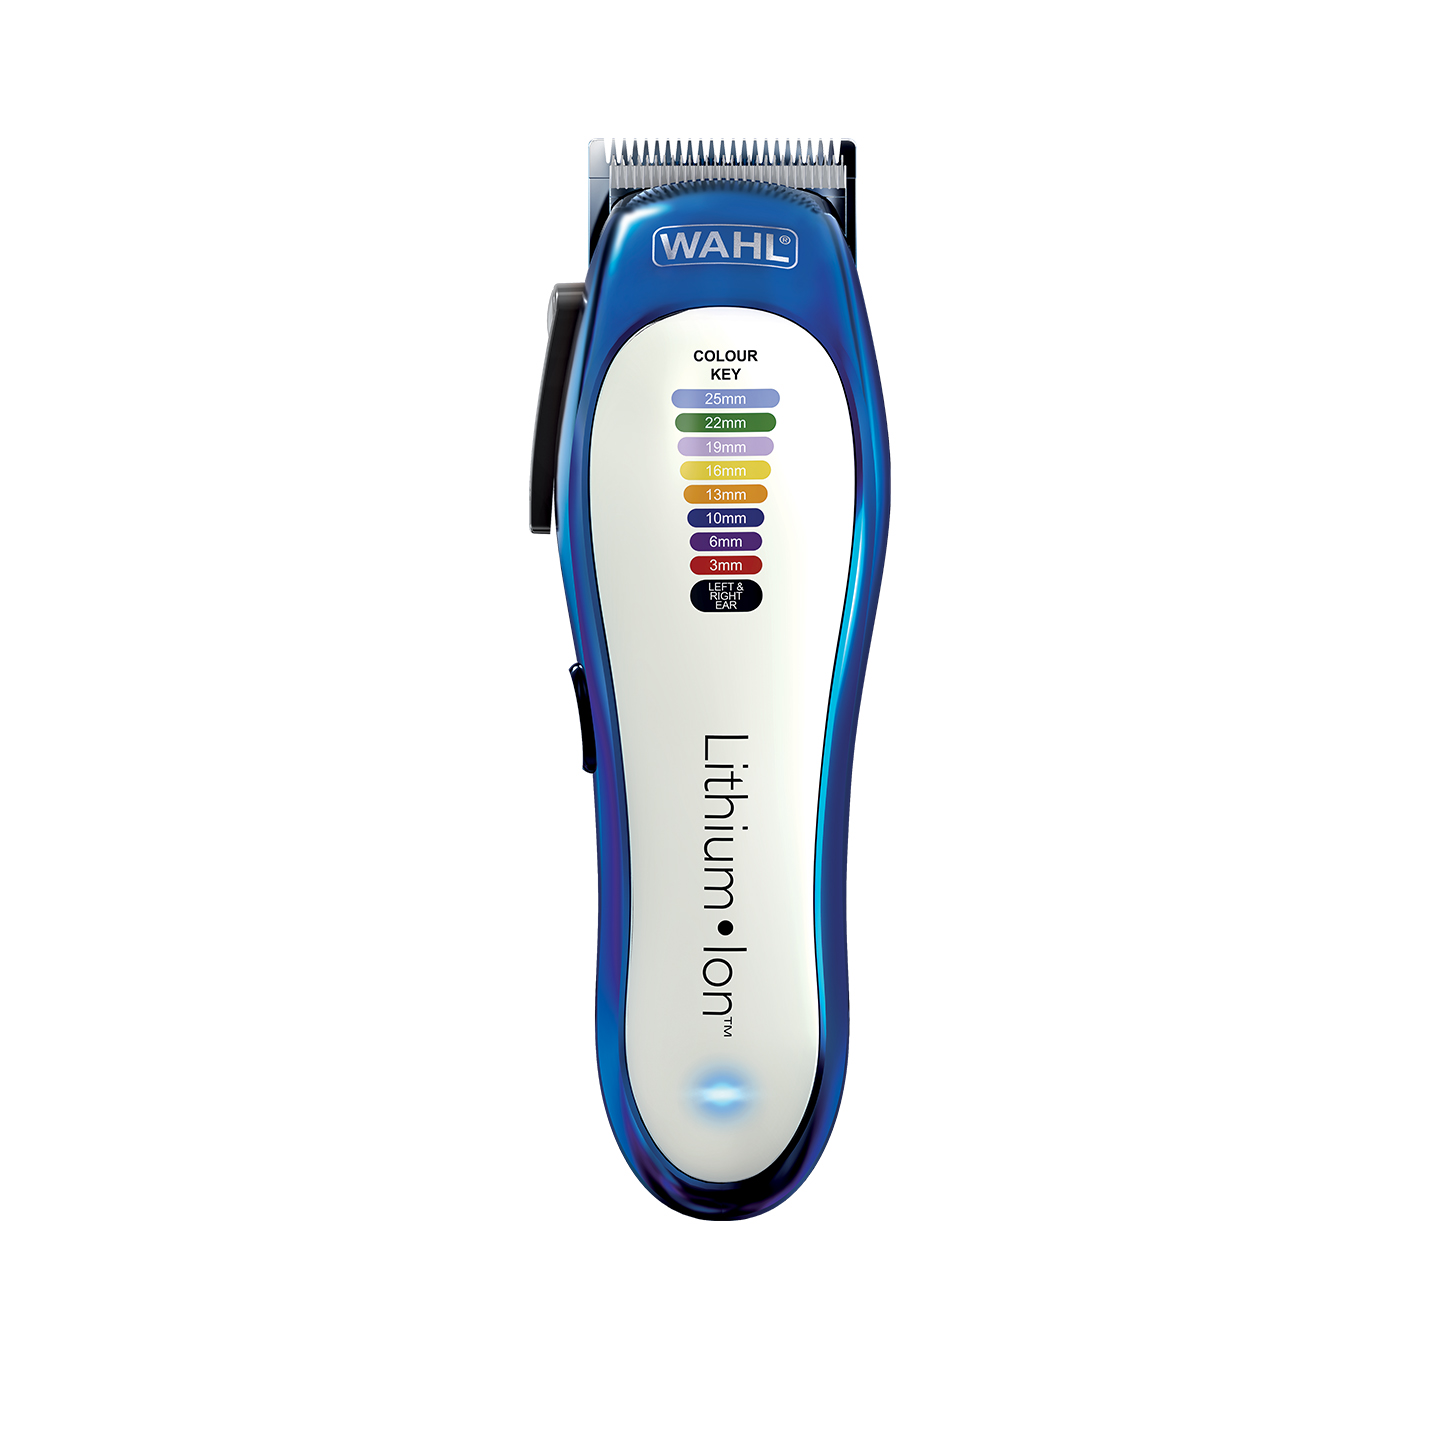 wahl lithium ion cordless